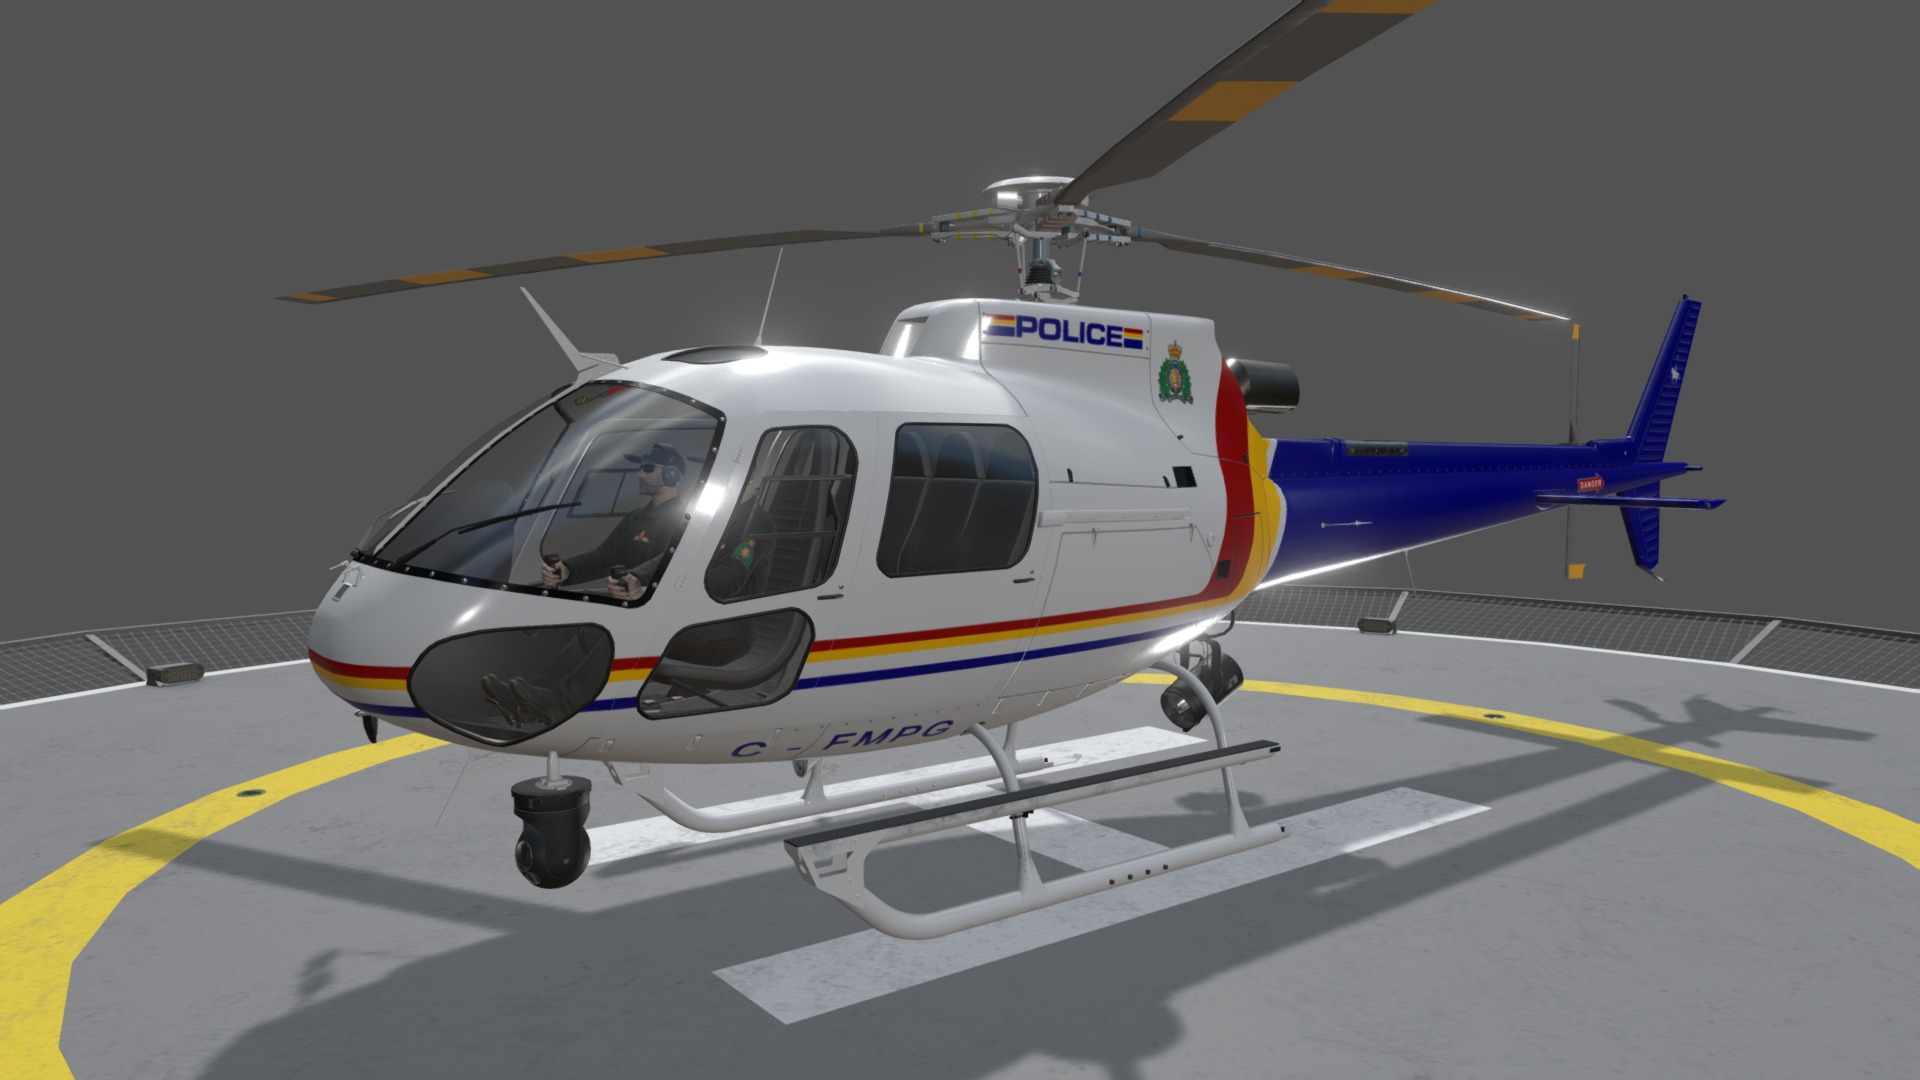 3D model AS-350 Royal Canadian Mounted Police Animated - This is a 3D model of the AS-350 Royal Canadian Mounted Police Animated. The 3D model is about a helicopter on a runway.